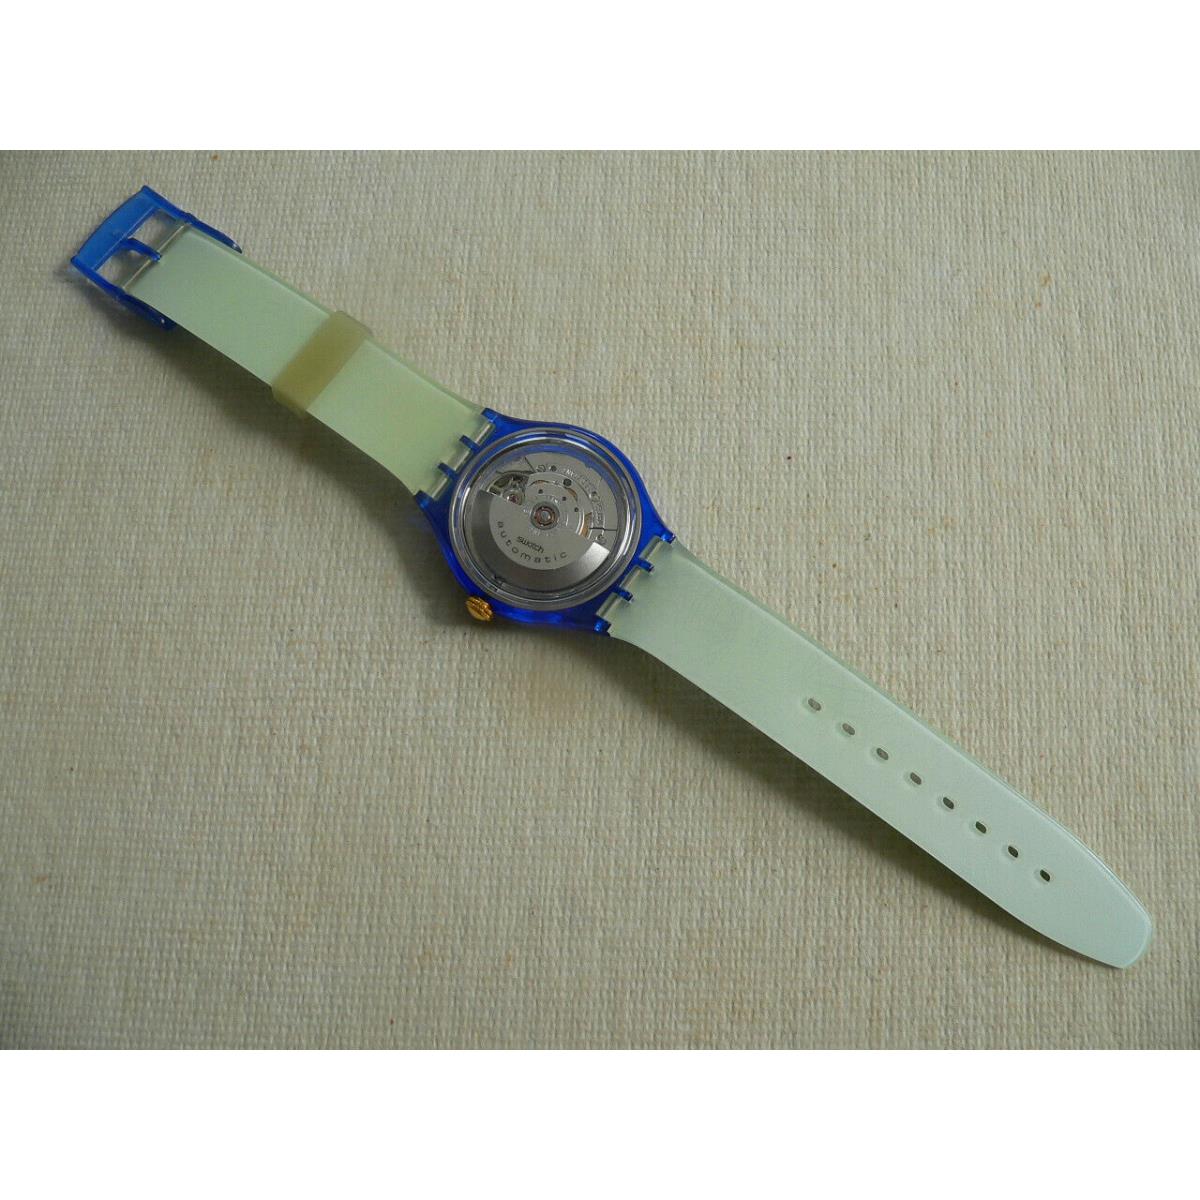 Swatch watch Edwin Moses - Multi-Color Dial, Multi-Color Band